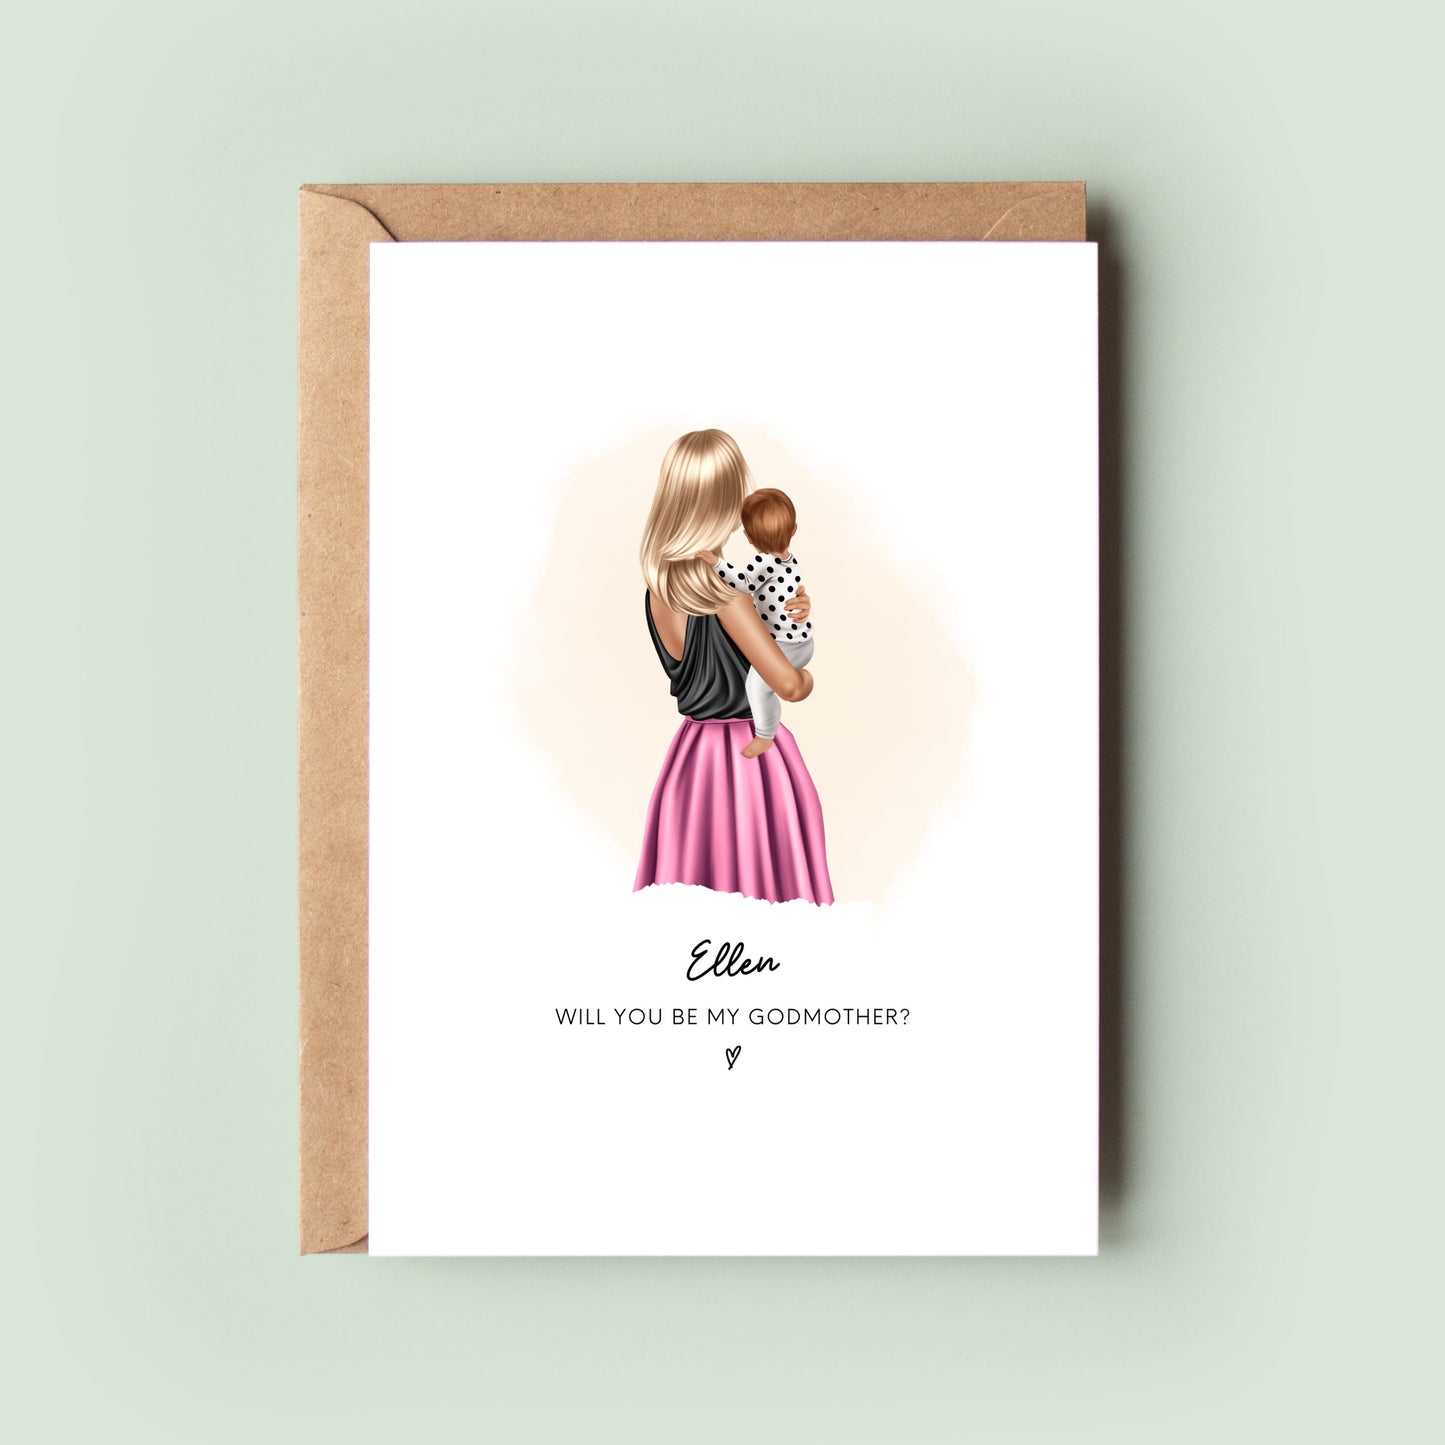 Personalised Godmother Card, Will You Be My Godmother Card, Godmother Proposal Card, Godmother Card, Christening Card, Godmother Gift, Thank